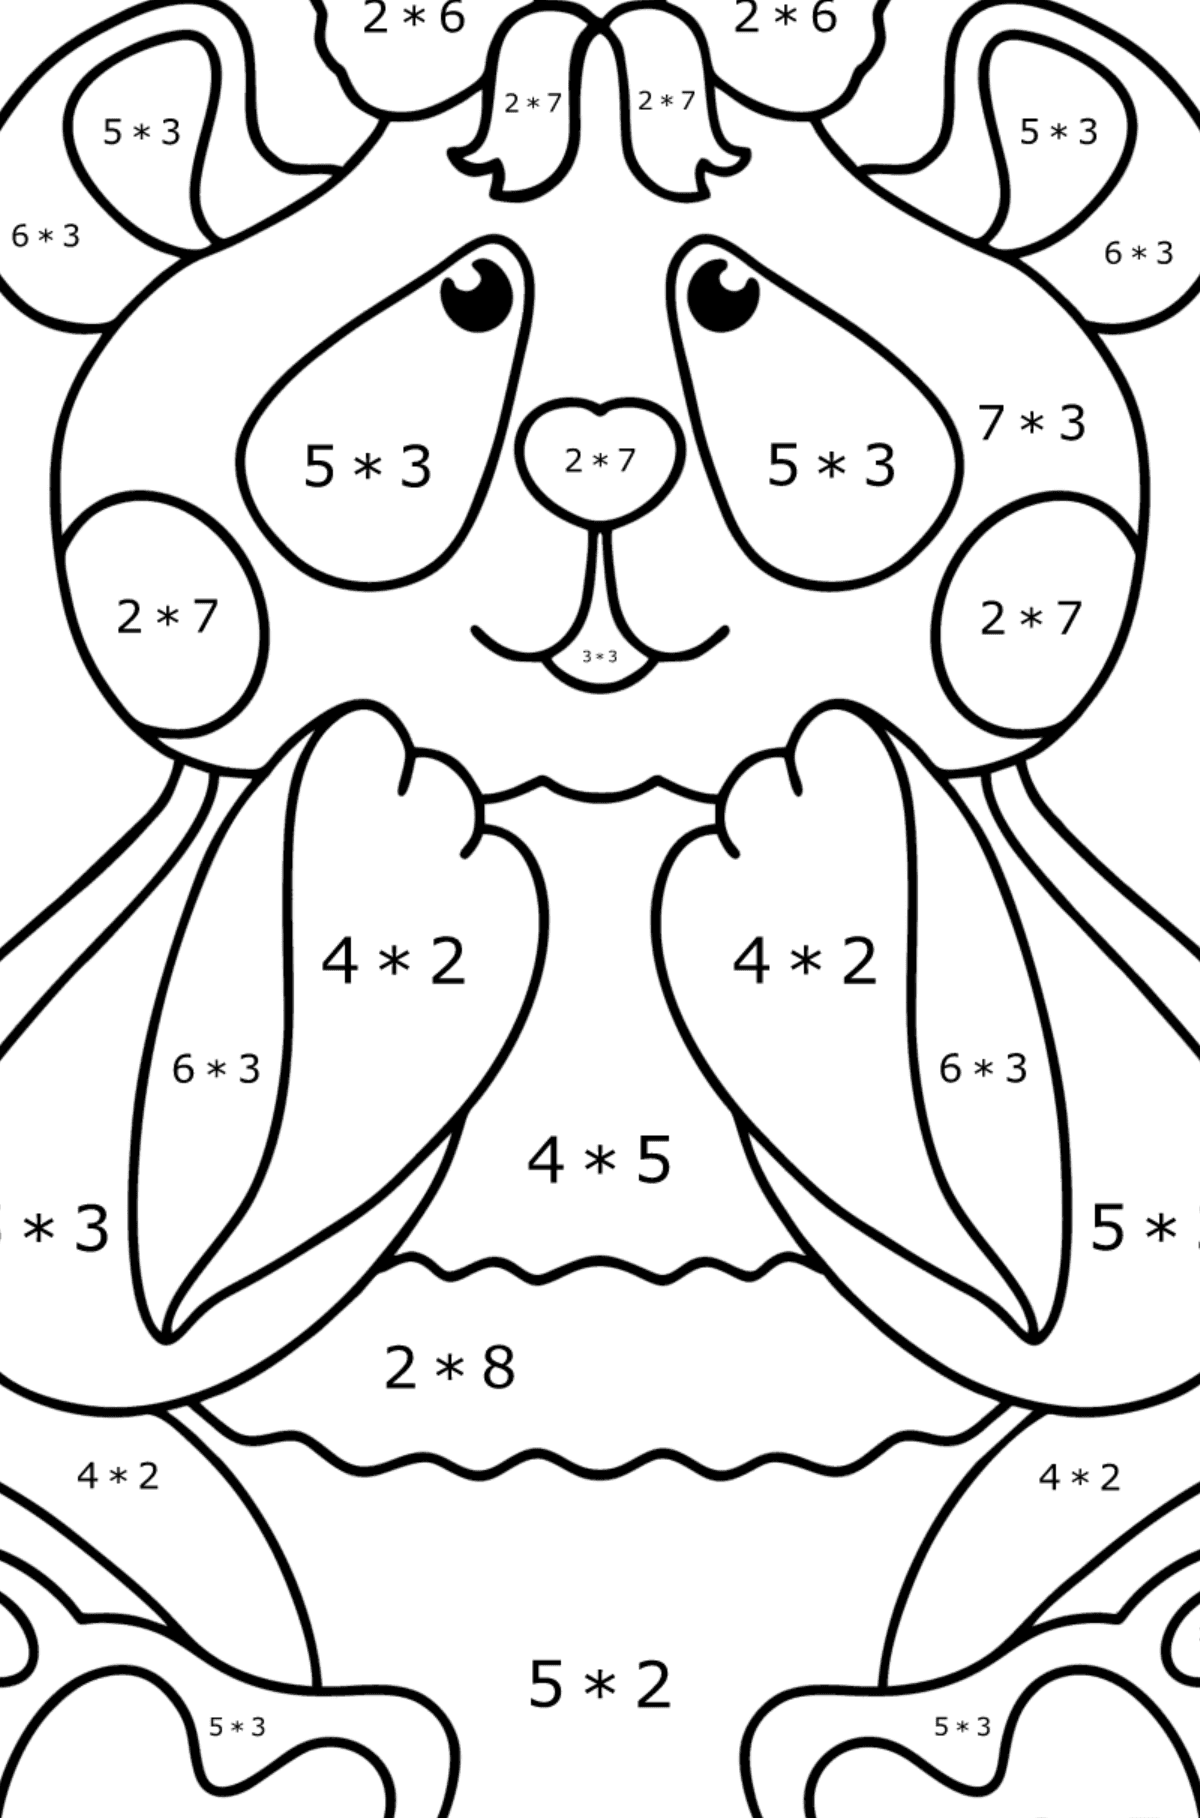 Panda baby coloring page - Math Coloring - Multiplication for Kids